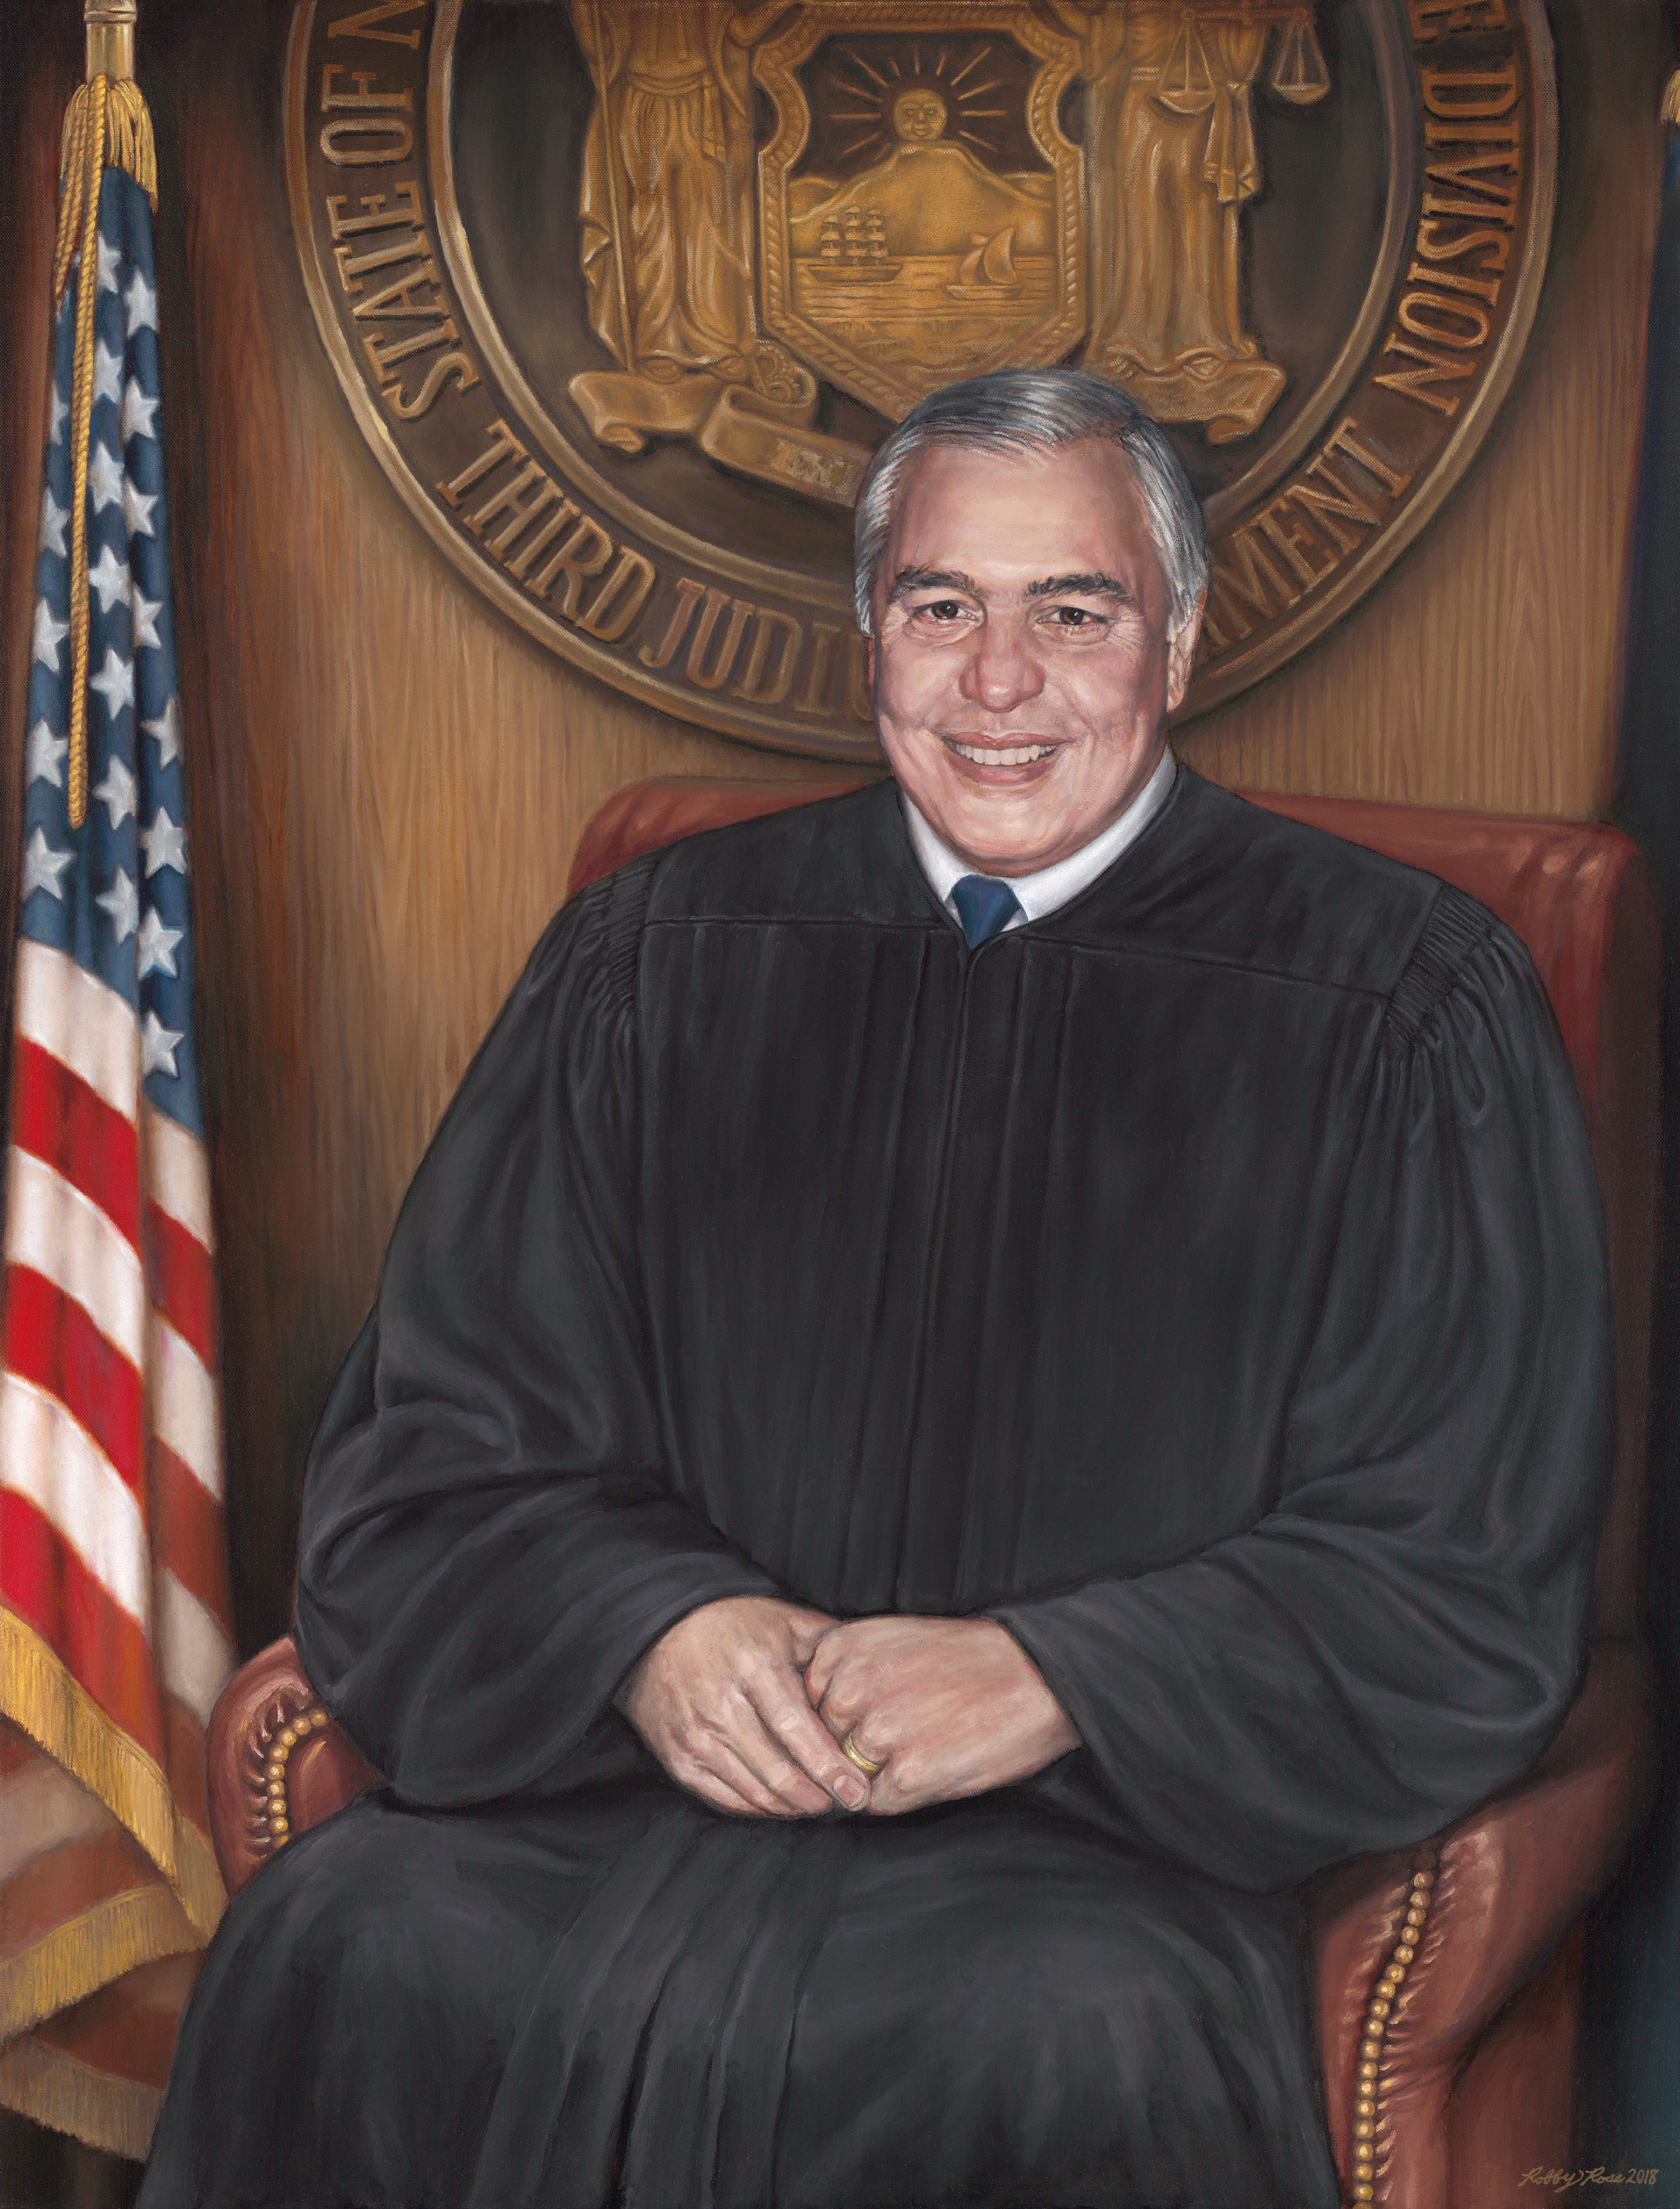 Hon. Anthony V. Cardona, Presiding Justice of the Appellate Division of the New York State Supreme Court, Third Department